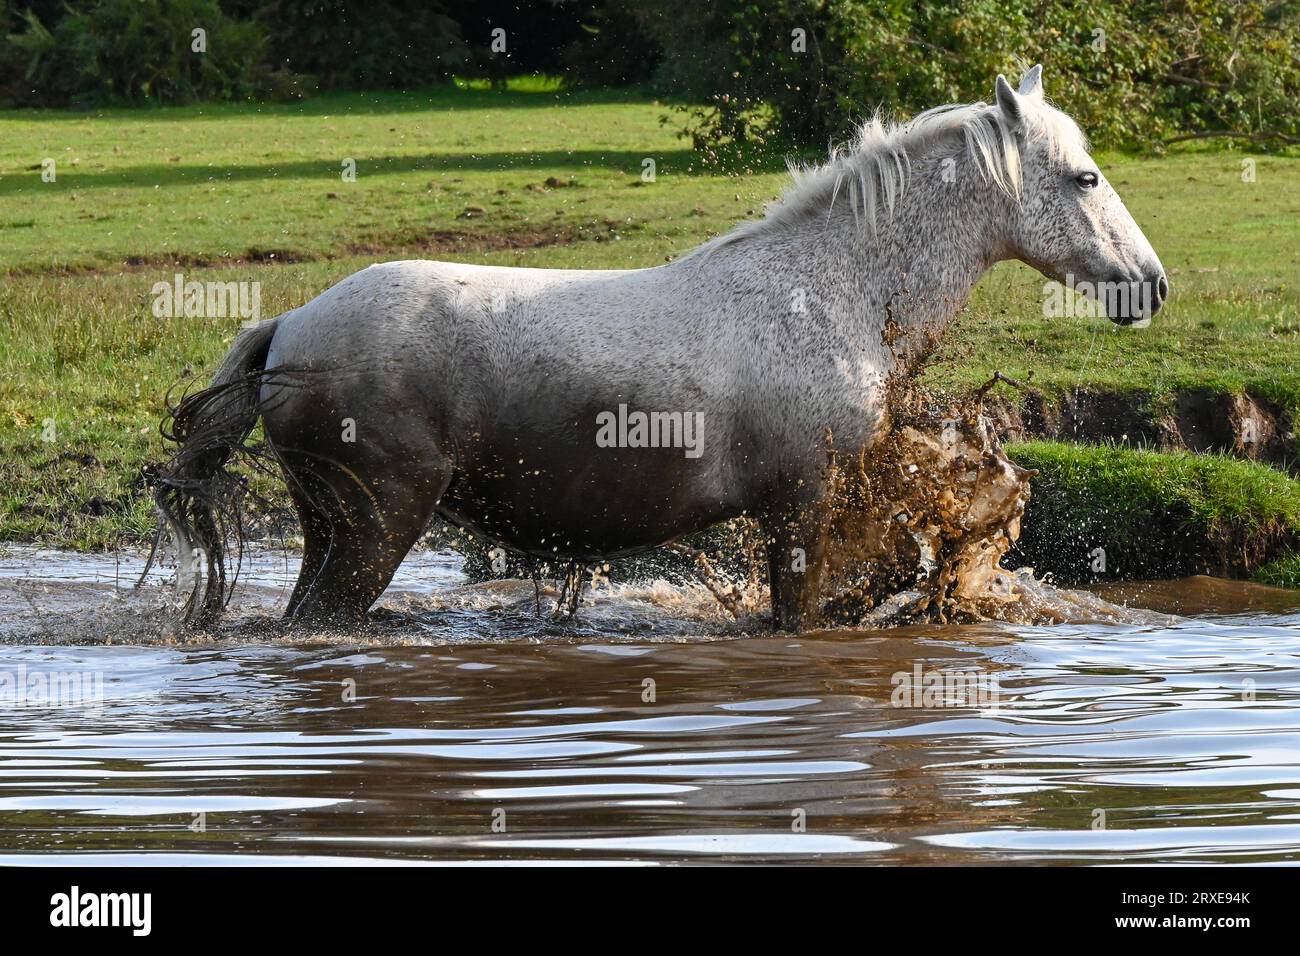 The New Forest National Park, Hampshire, Wild ponies roaming freely in their natural habitat, a grey pony cooling down and covering itself in mud Stock Photo